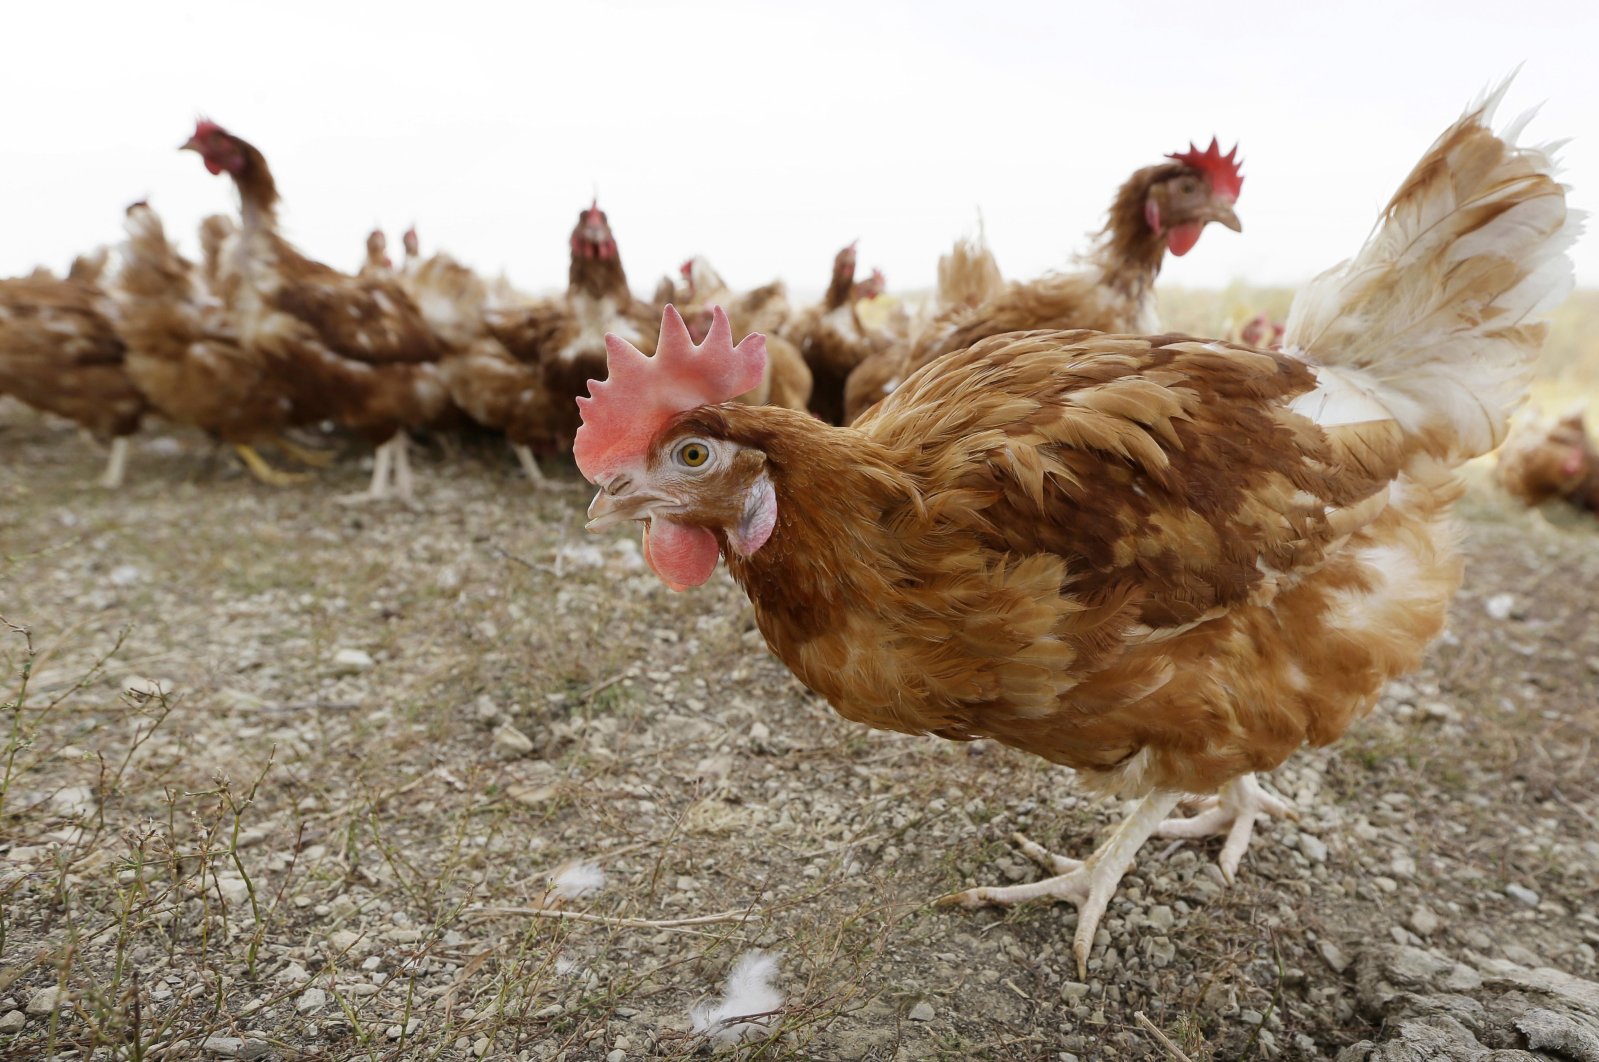 Cage-free chickens walk in a fenced pasture at an organic farm near Waukon, Iowa on Oct. 21, 2015. (AP File Photo)